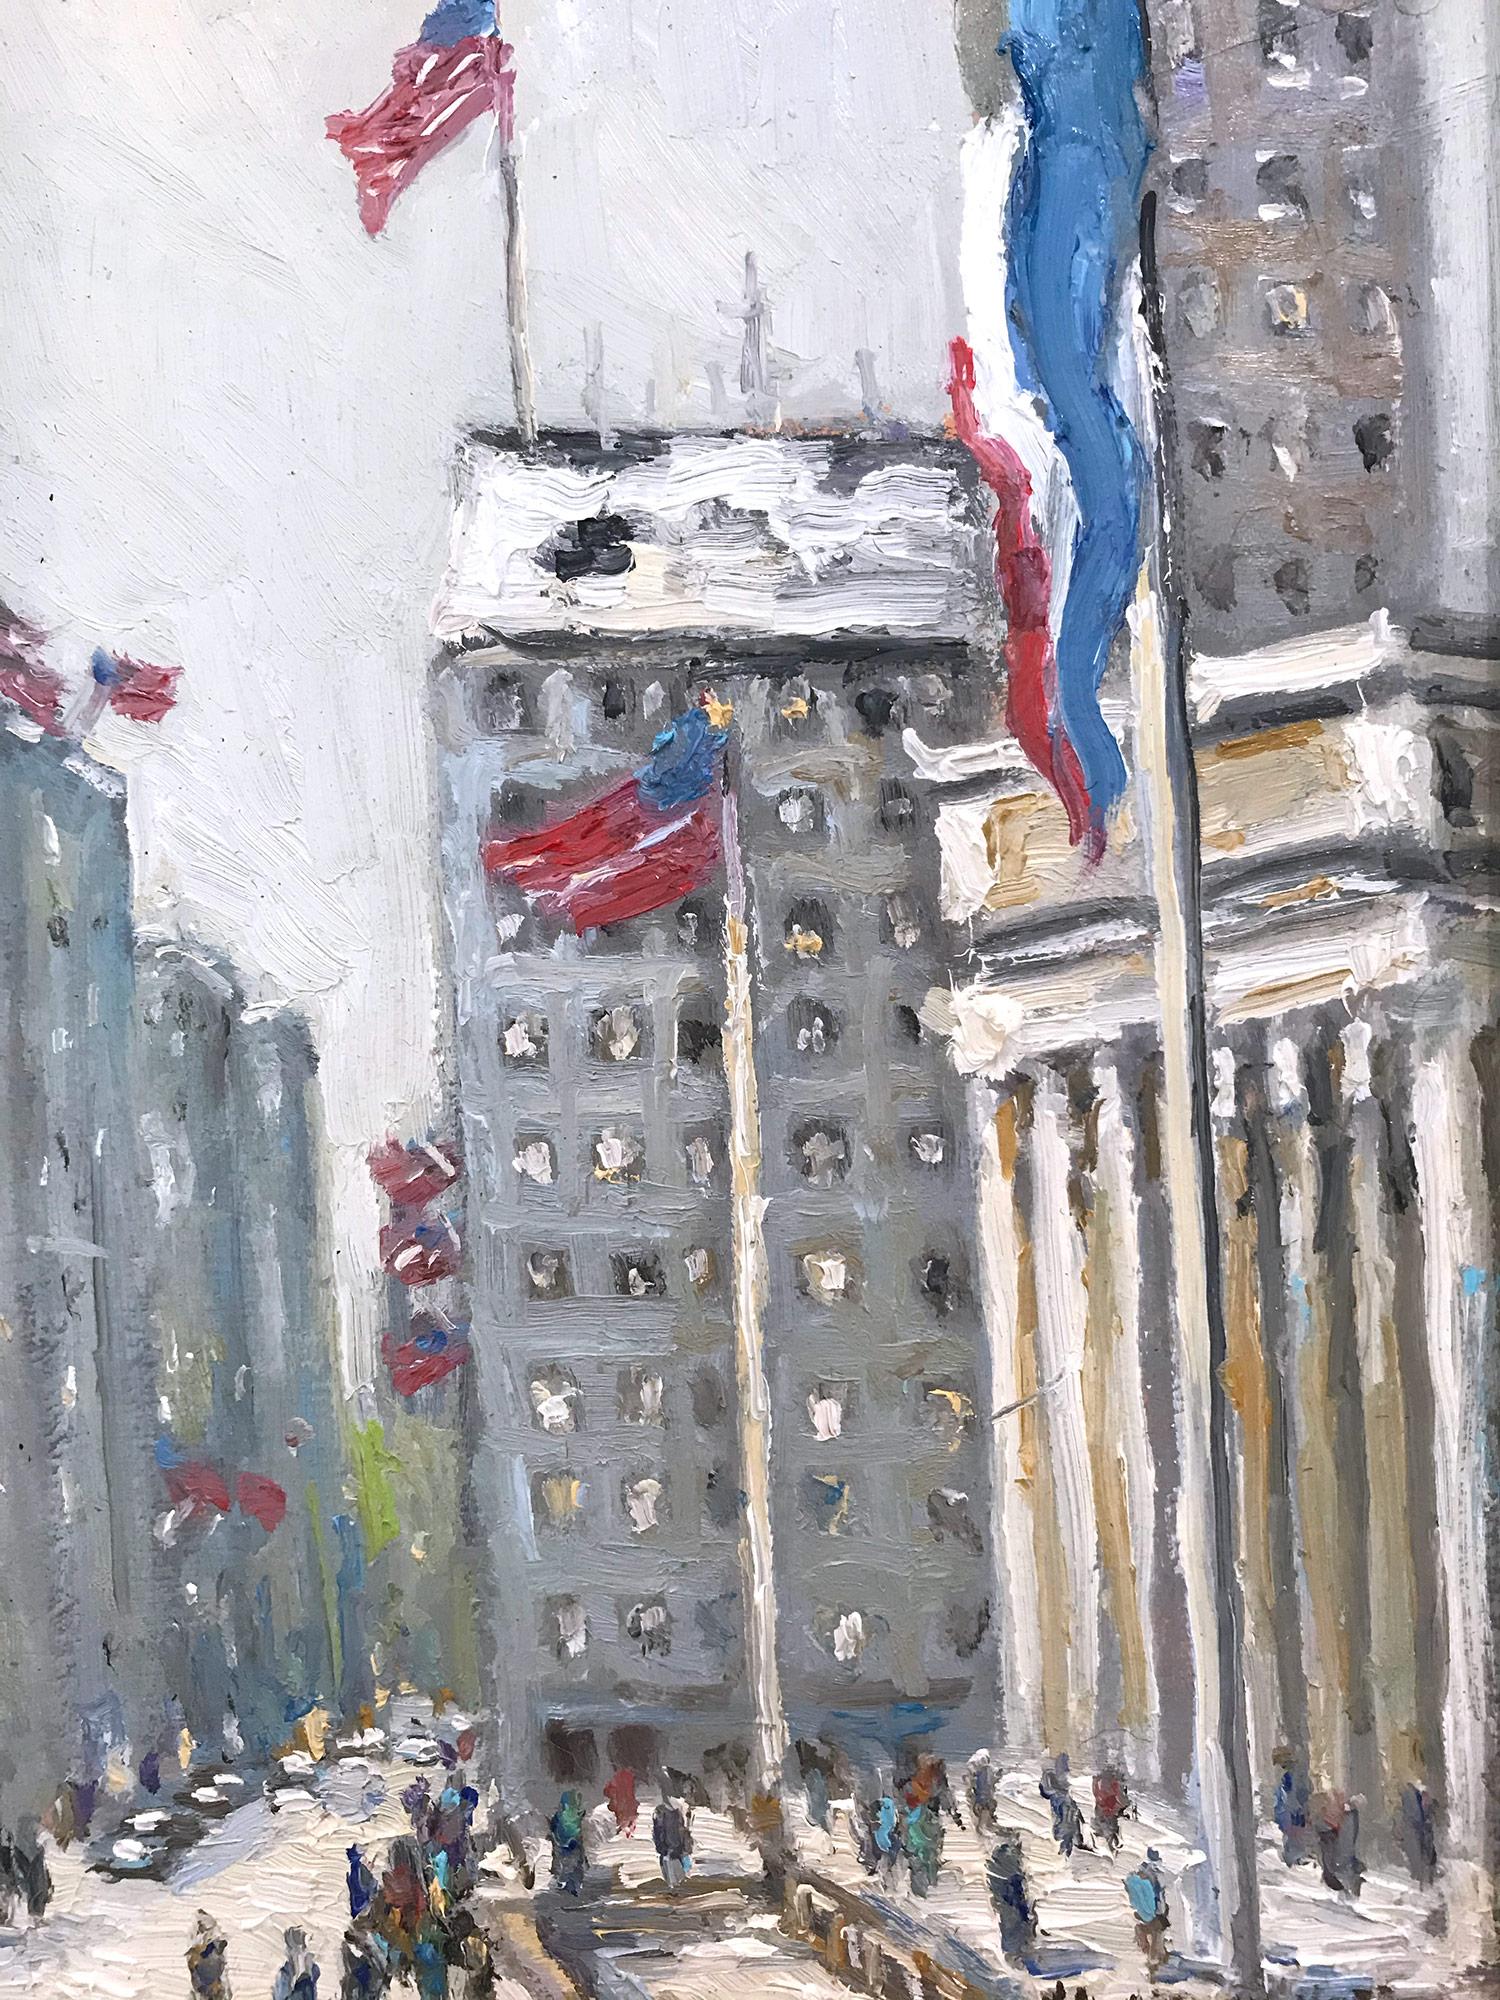 Impressionist New York City winter cityscene depicting the Library with American flags, cars and pedestrians off 5th Avenue in a most intimate, yet energetic way. Christopher is known for capturing the beauty and simplicity of an earlier time of the